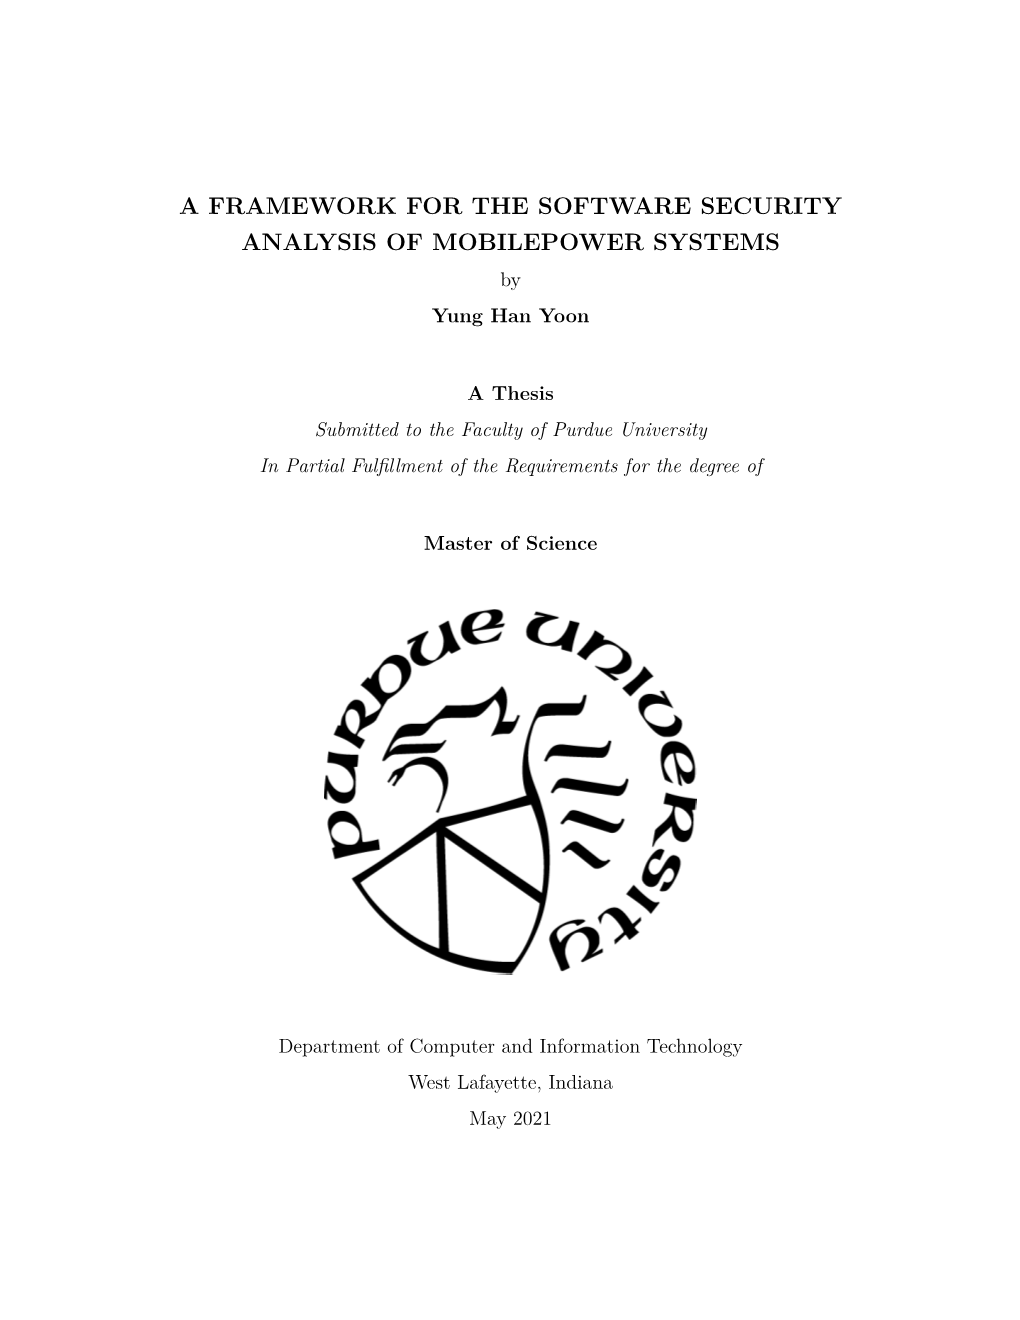 A FRAMEWORK for the SOFTWARE SECURITY ANALYSIS of MOBILEPOWER SYSTEMS by Yung Han Yoon